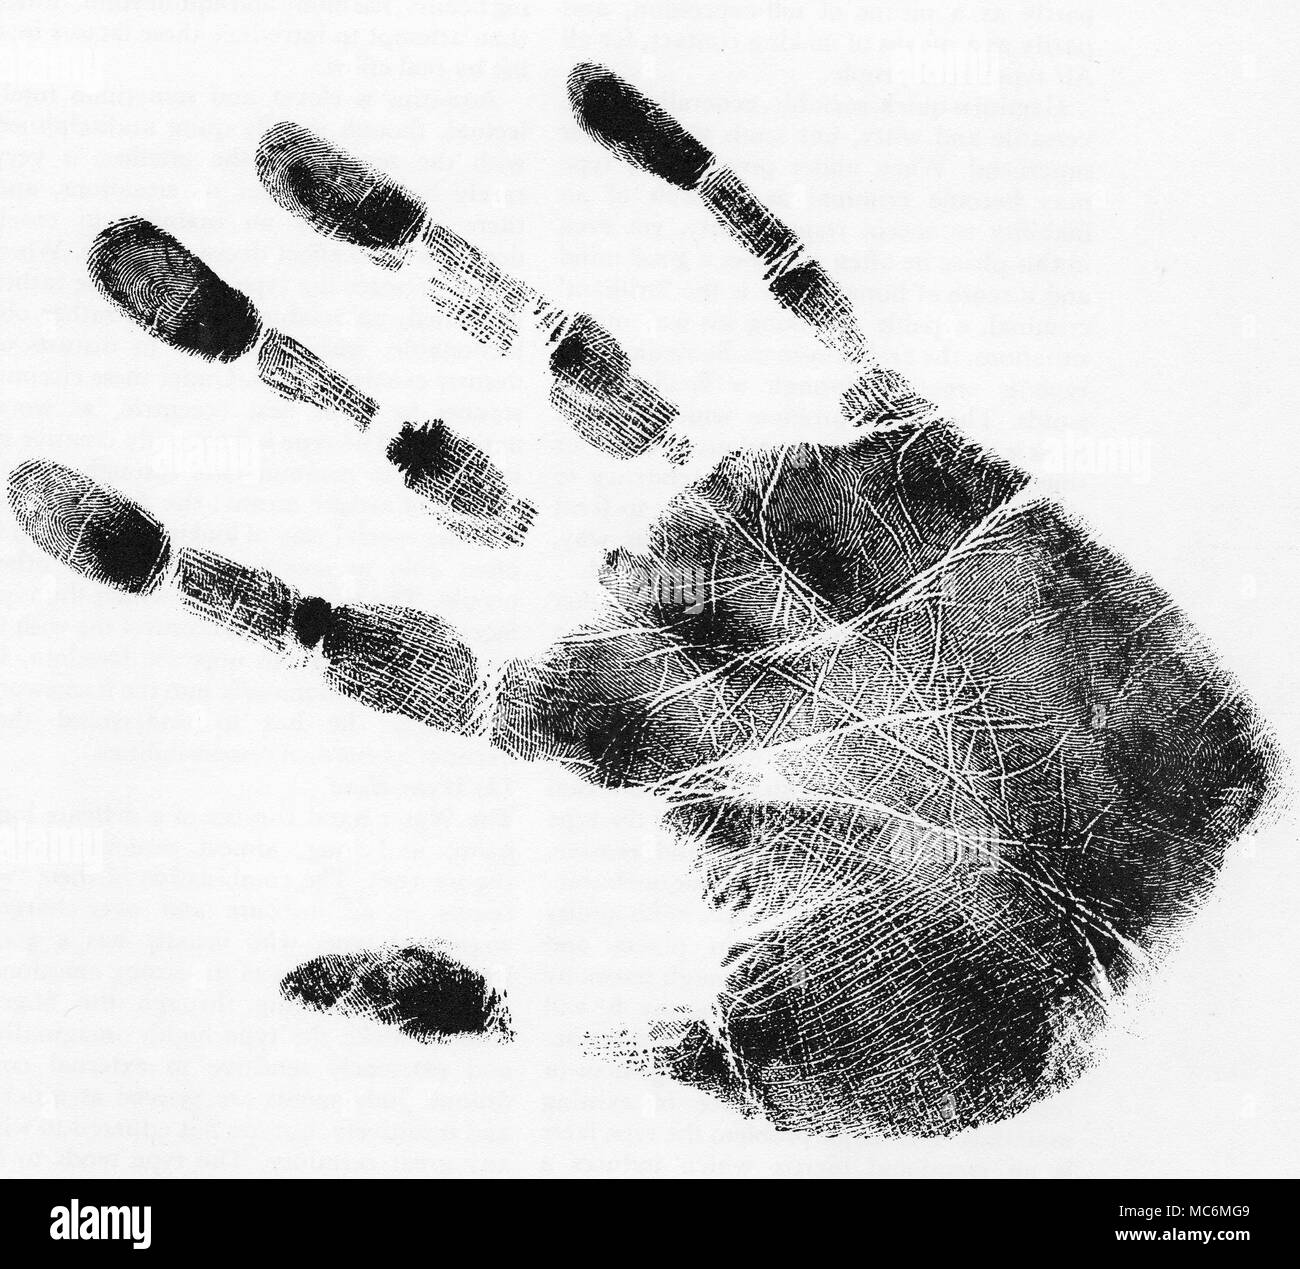 PALMISTRY - CHIROGNOMY A print of the Fire hand. The hand type has a long palm and short fingers. While the main lines (such as Heart, Head and Life) are clearly defined, the rest of the palm is covered in energetic short lines, as in this example. Stock Photo